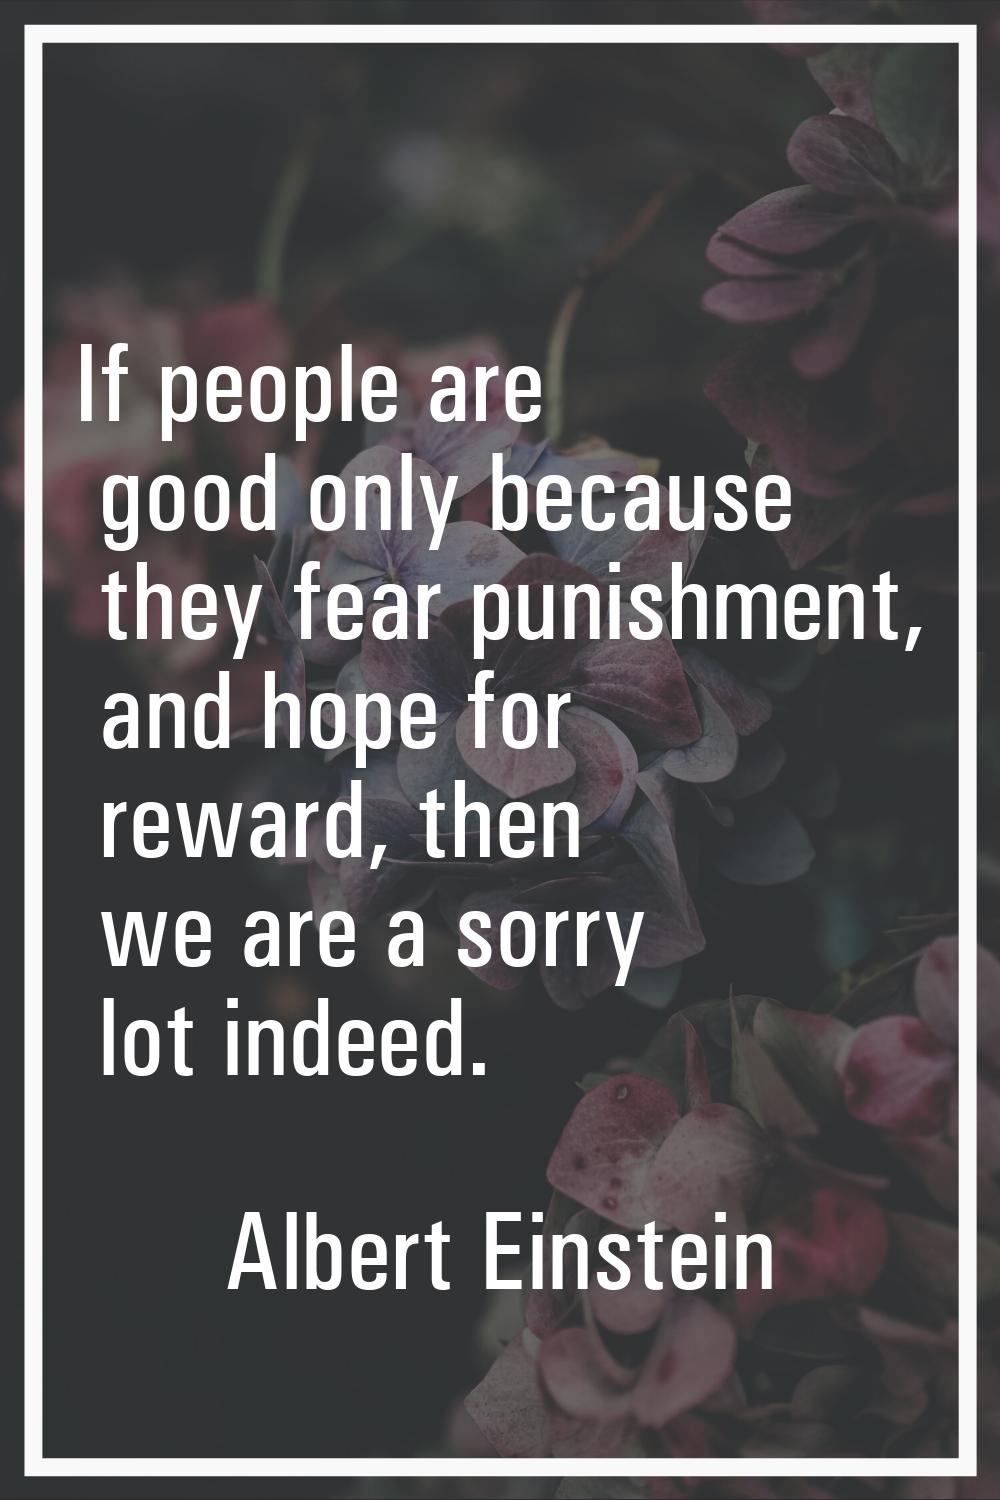 If people are good only because they fear punishment, and hope for reward, then we are a sorry lot 